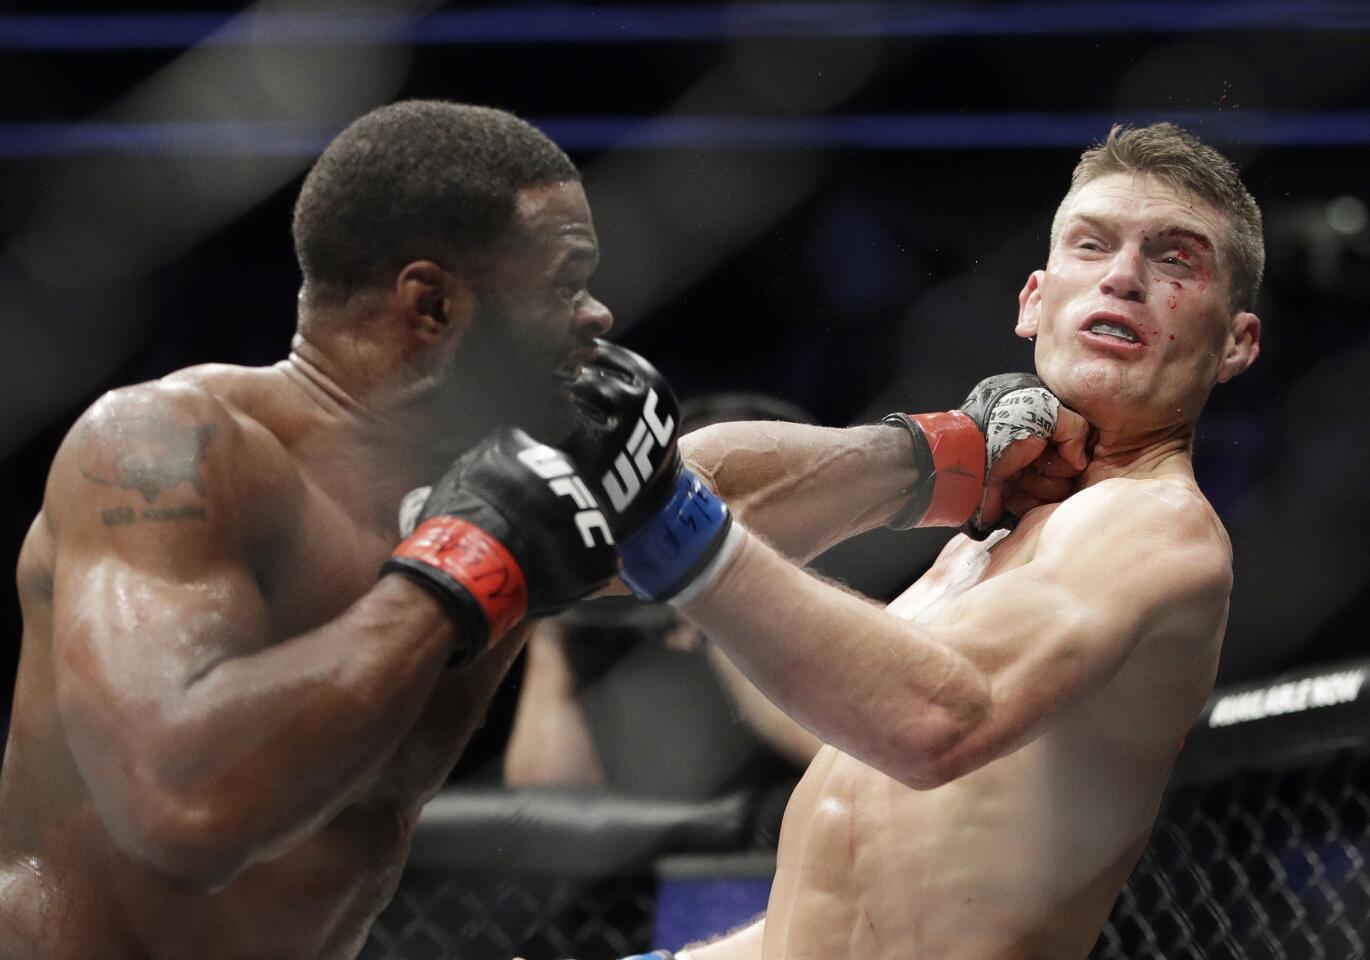 Tyron Woodley strikes Stephen Thompson with a left during their welterweight championship fight at UFC 209.